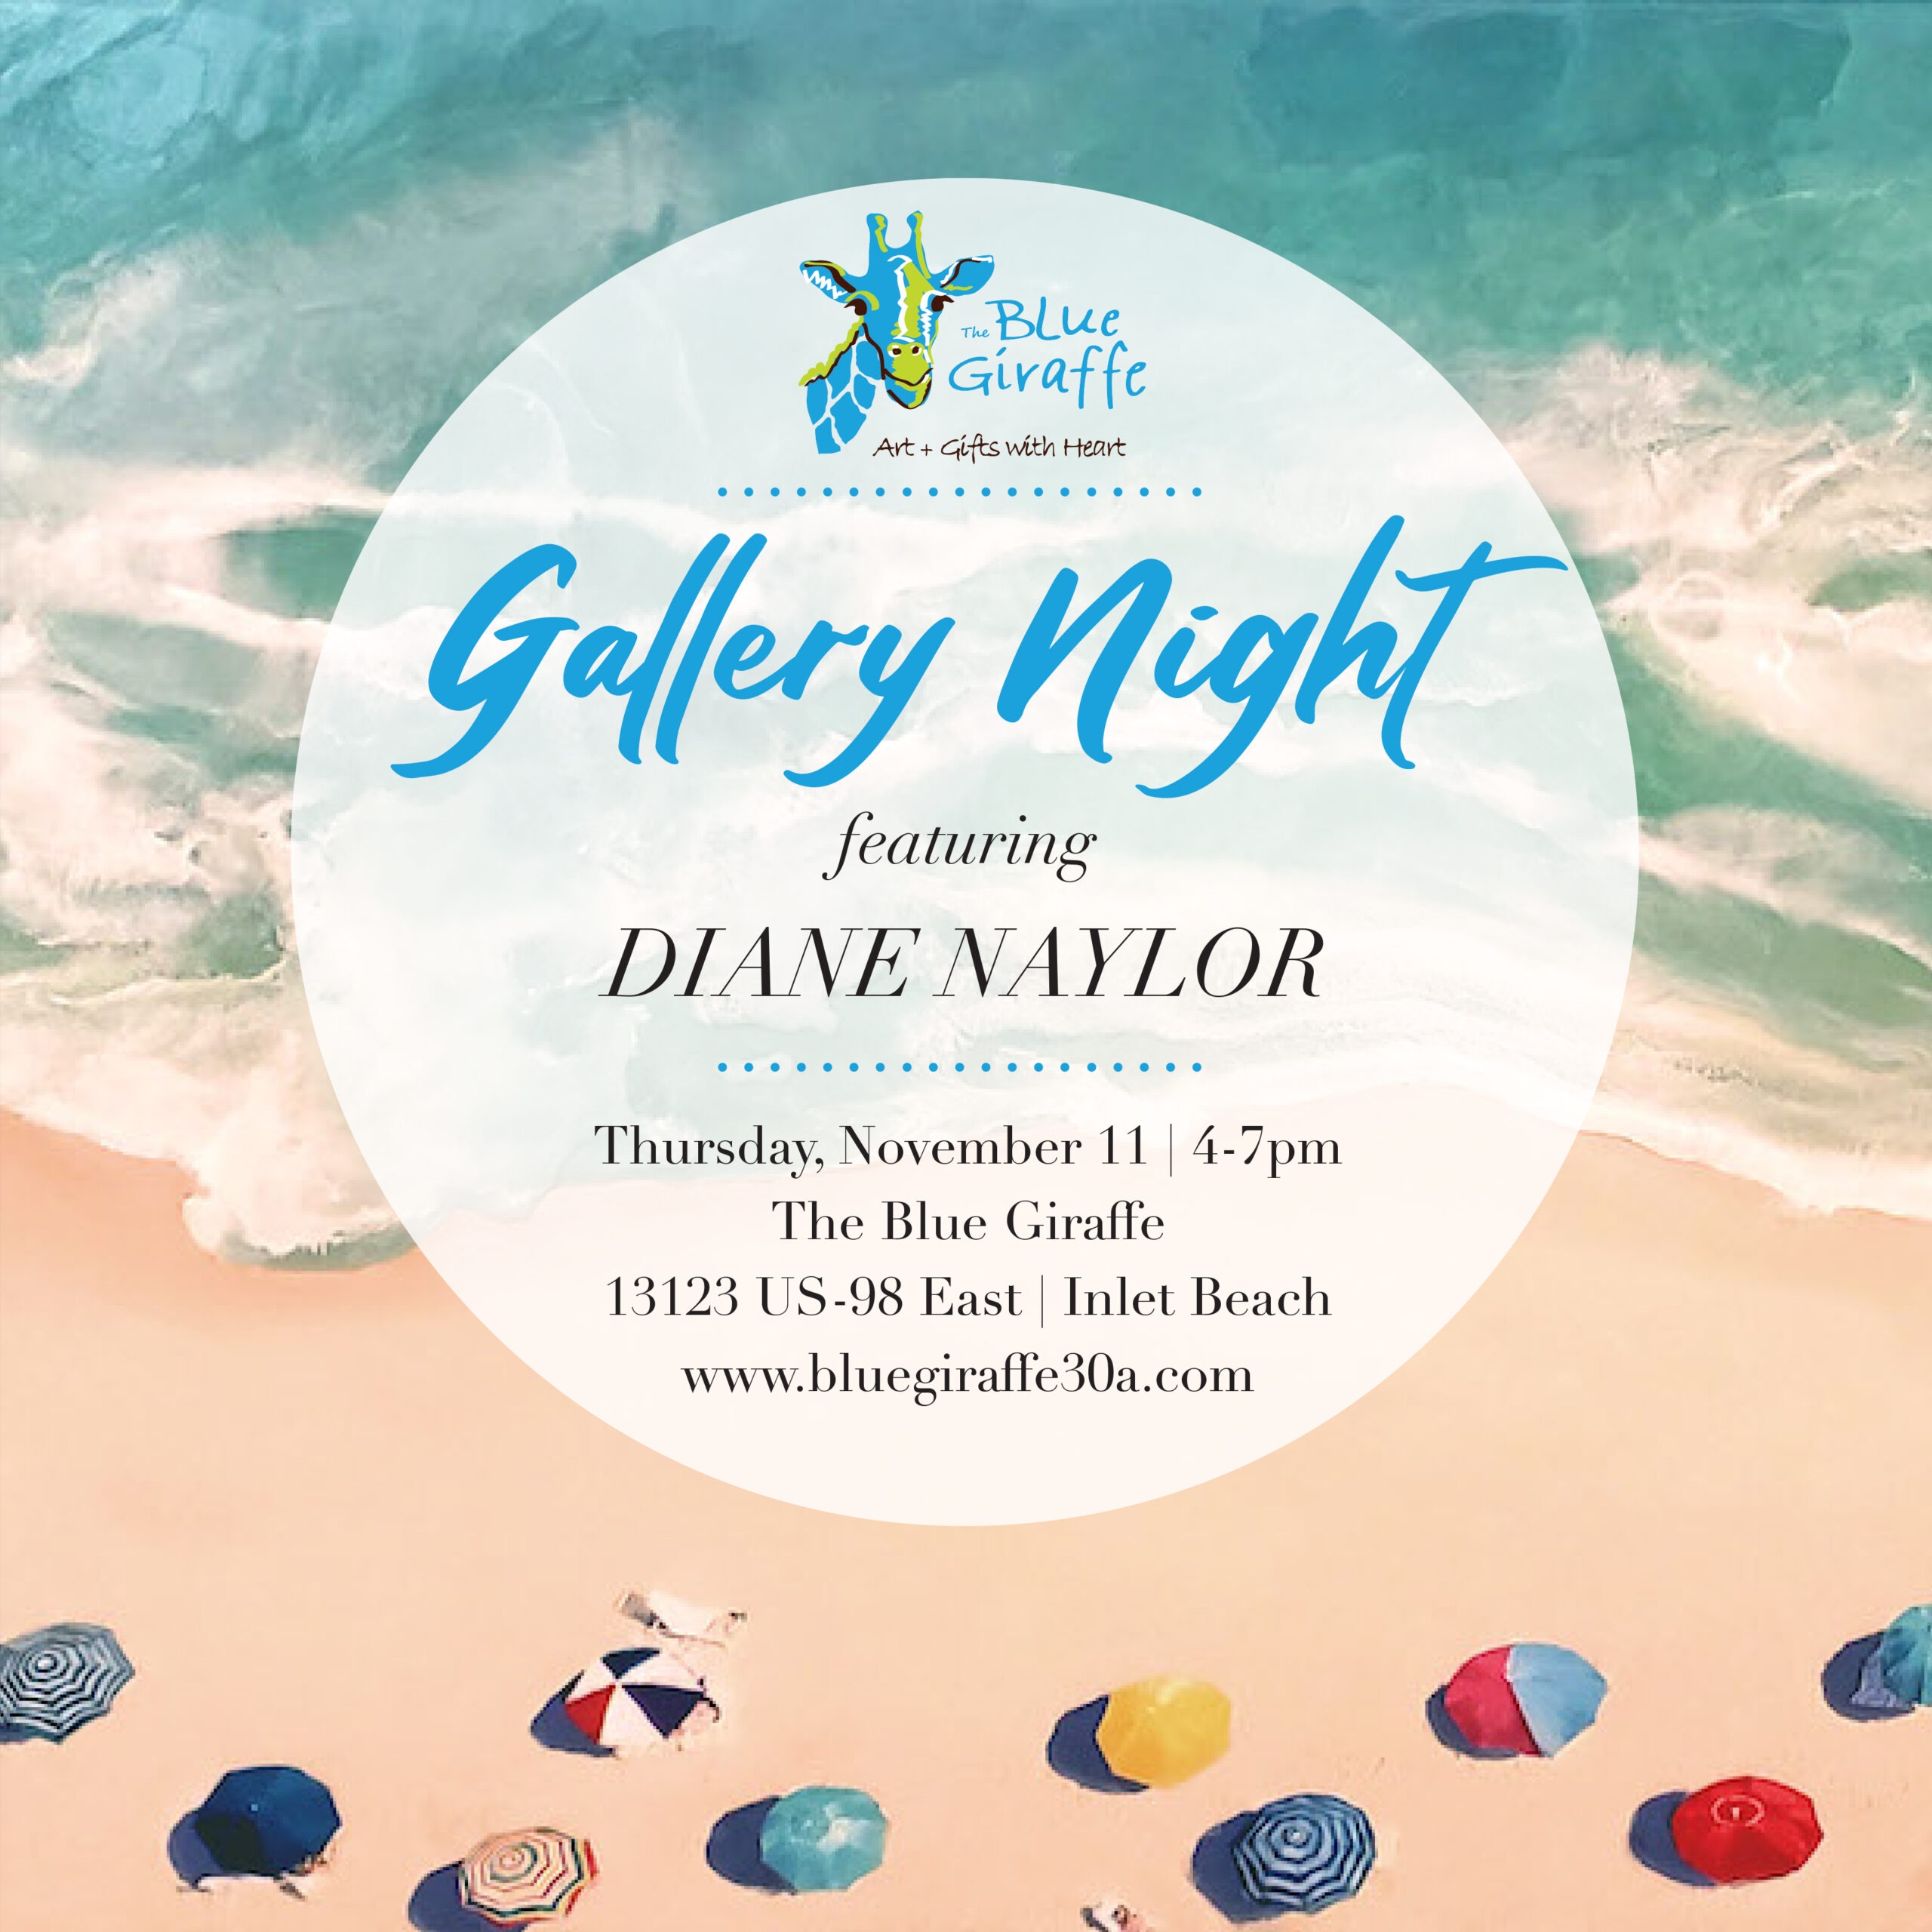 The Blue Giraffe to Host Gallery Night Featuring Diane Naylor